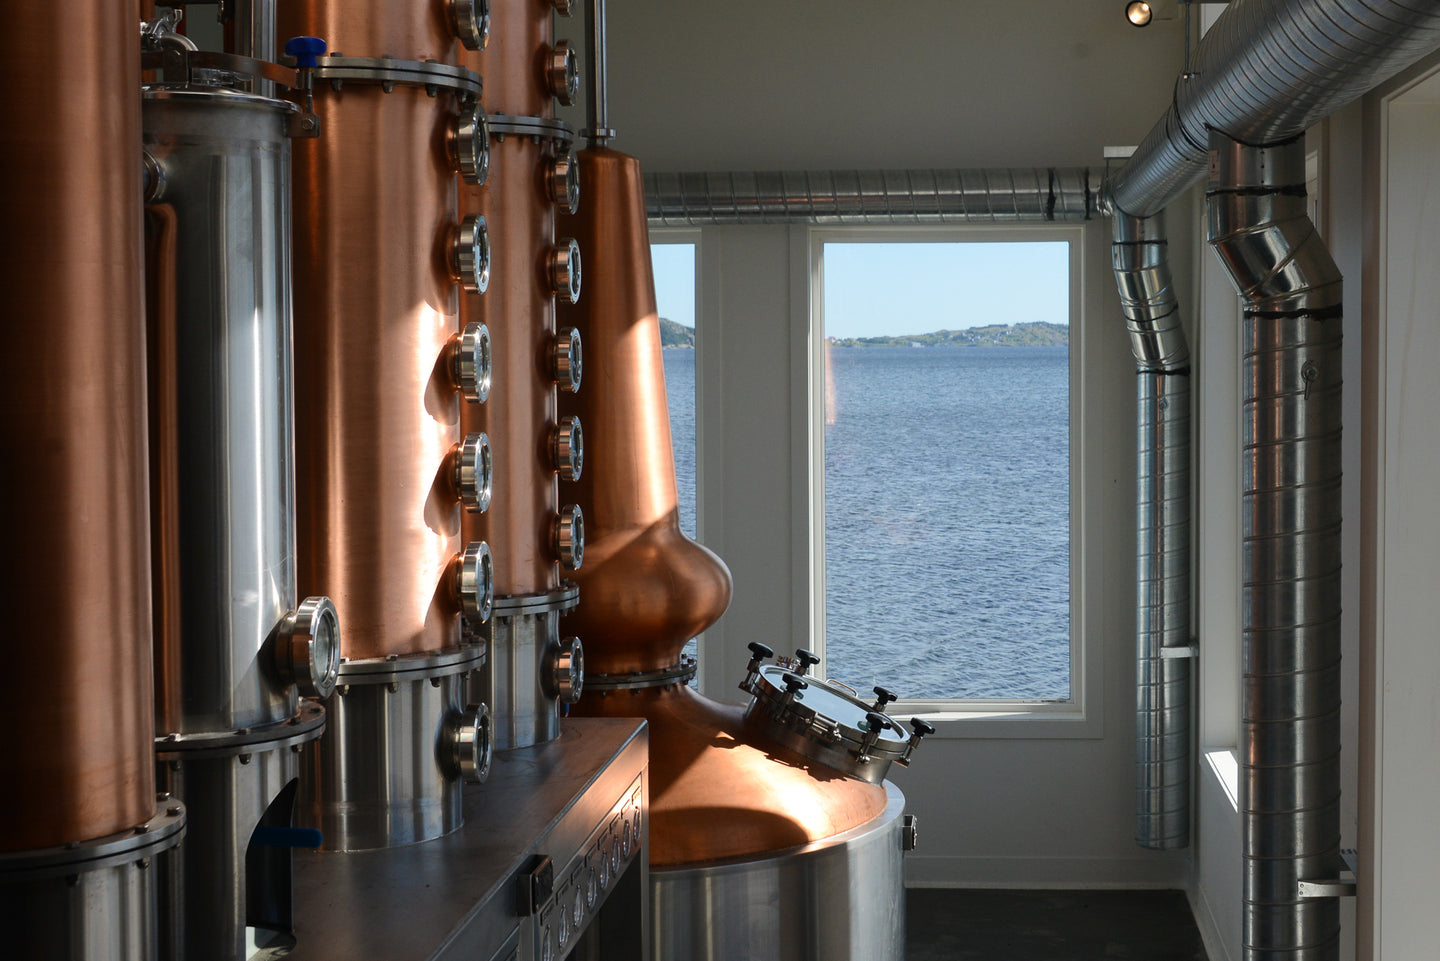 They say the closer you get to sea level, the better the distillation process.